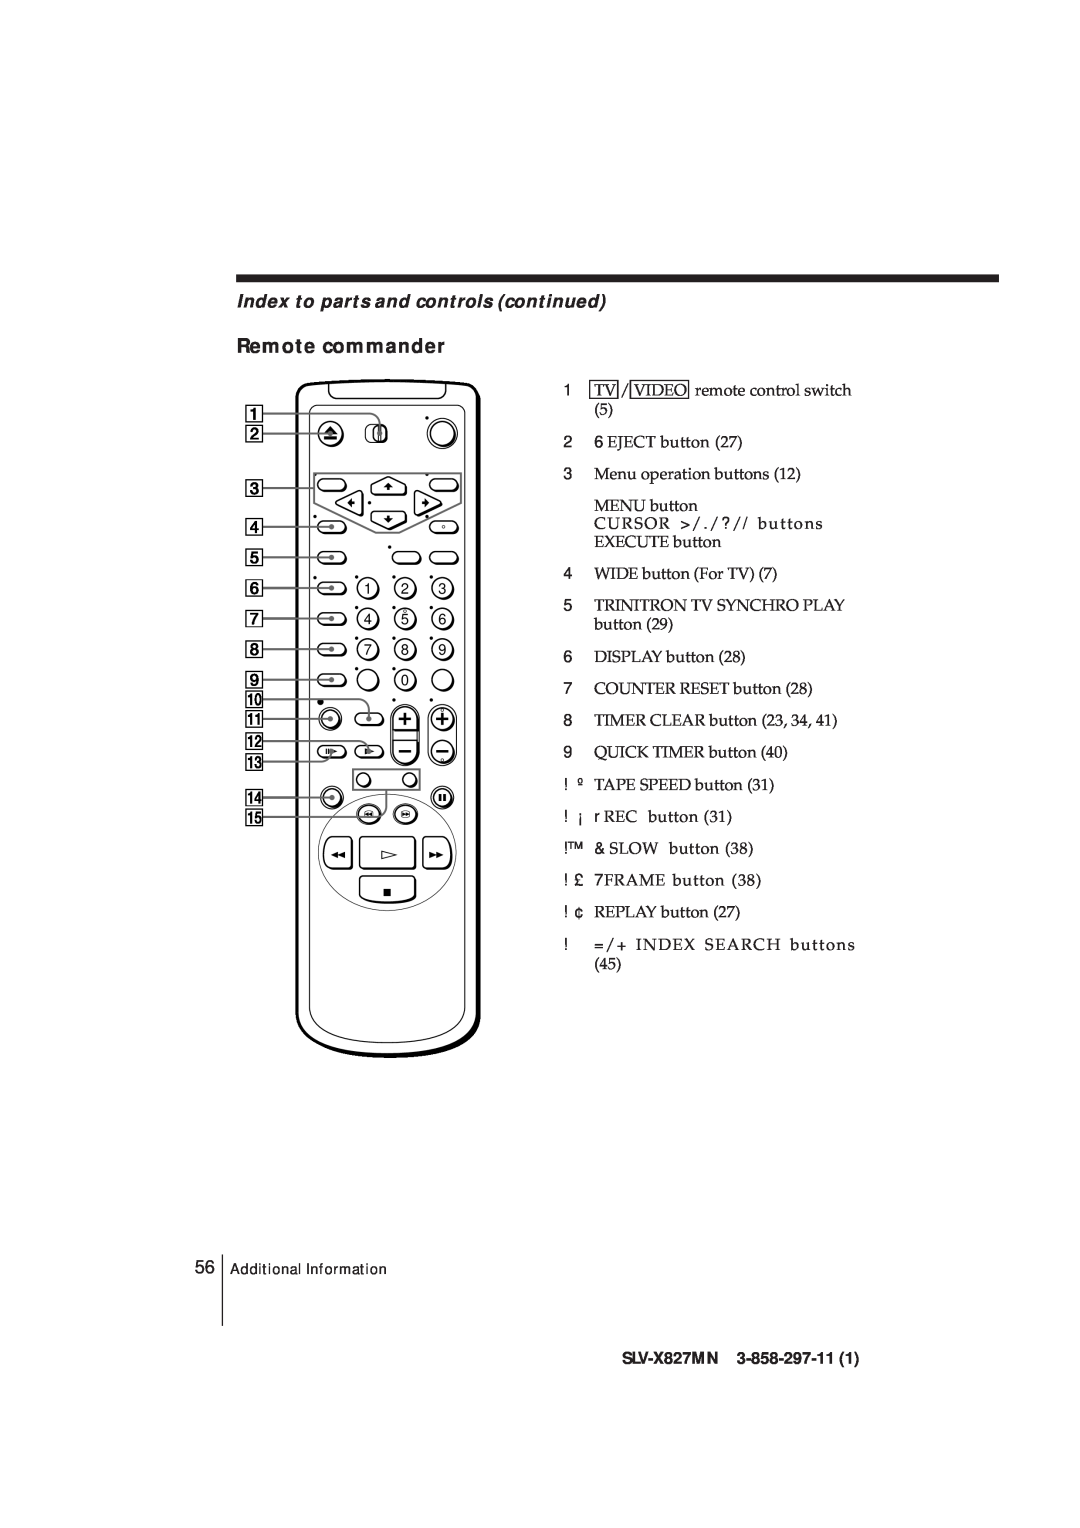 Sony manual Remote commander, Index to parts and controls continued, SLV-X827MN 3-858-297-11 